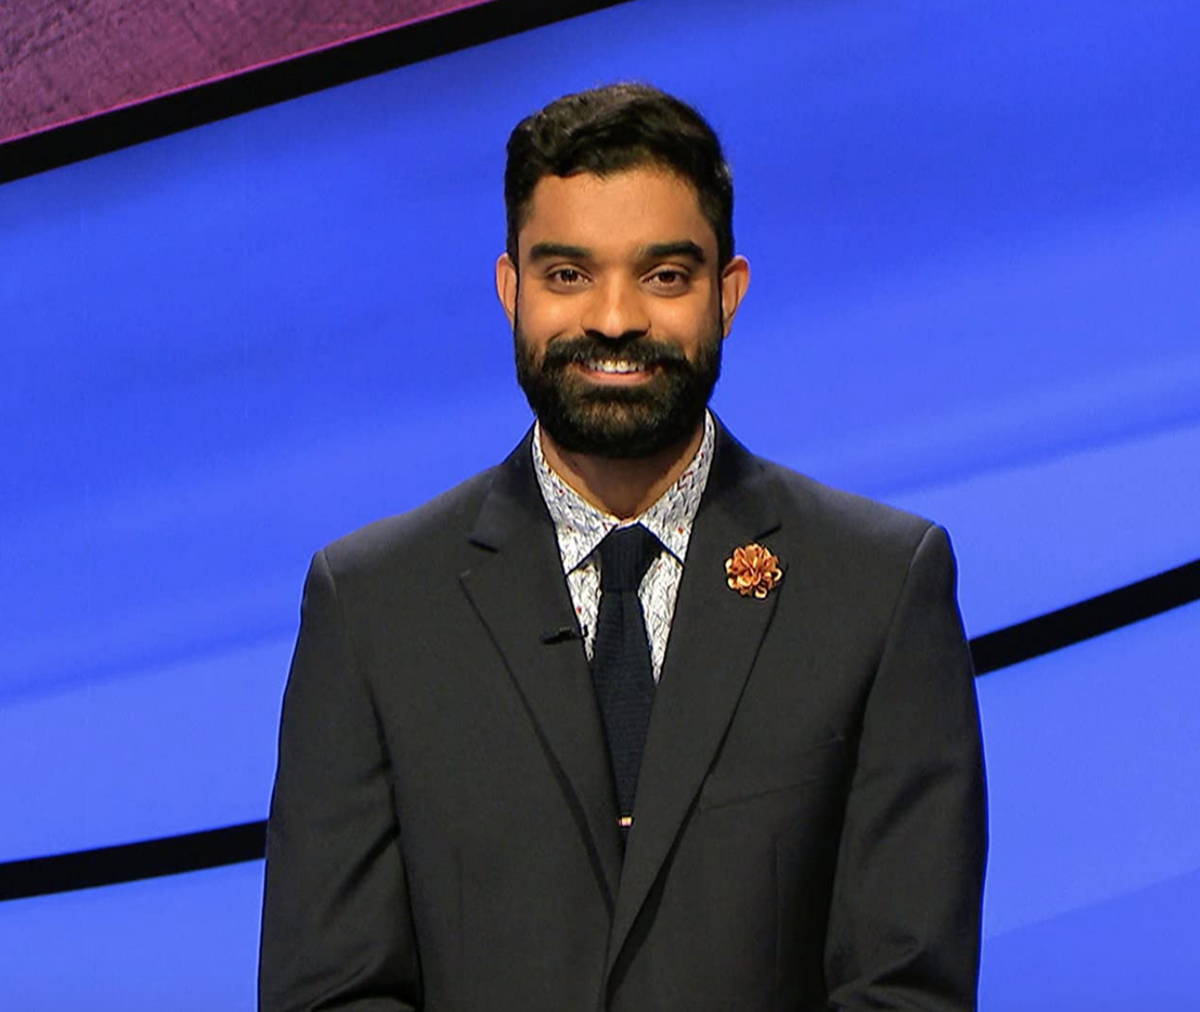 There Are So Many Rules That Jeopardy Contestants Have To Follow